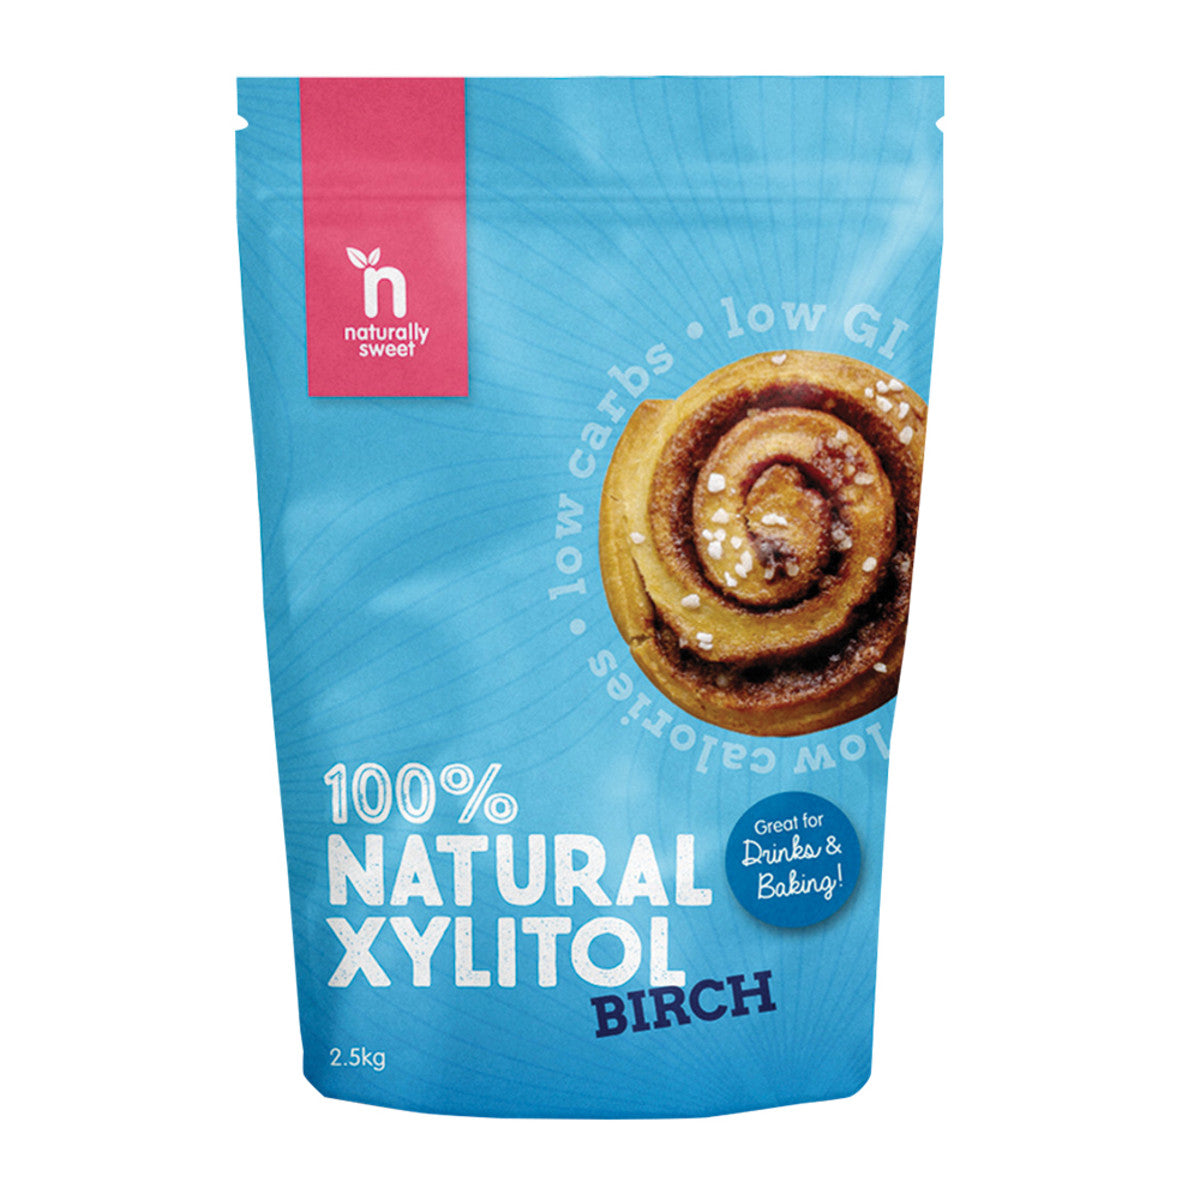 Naturally Sweet - 100% Natural Xylitol Birch